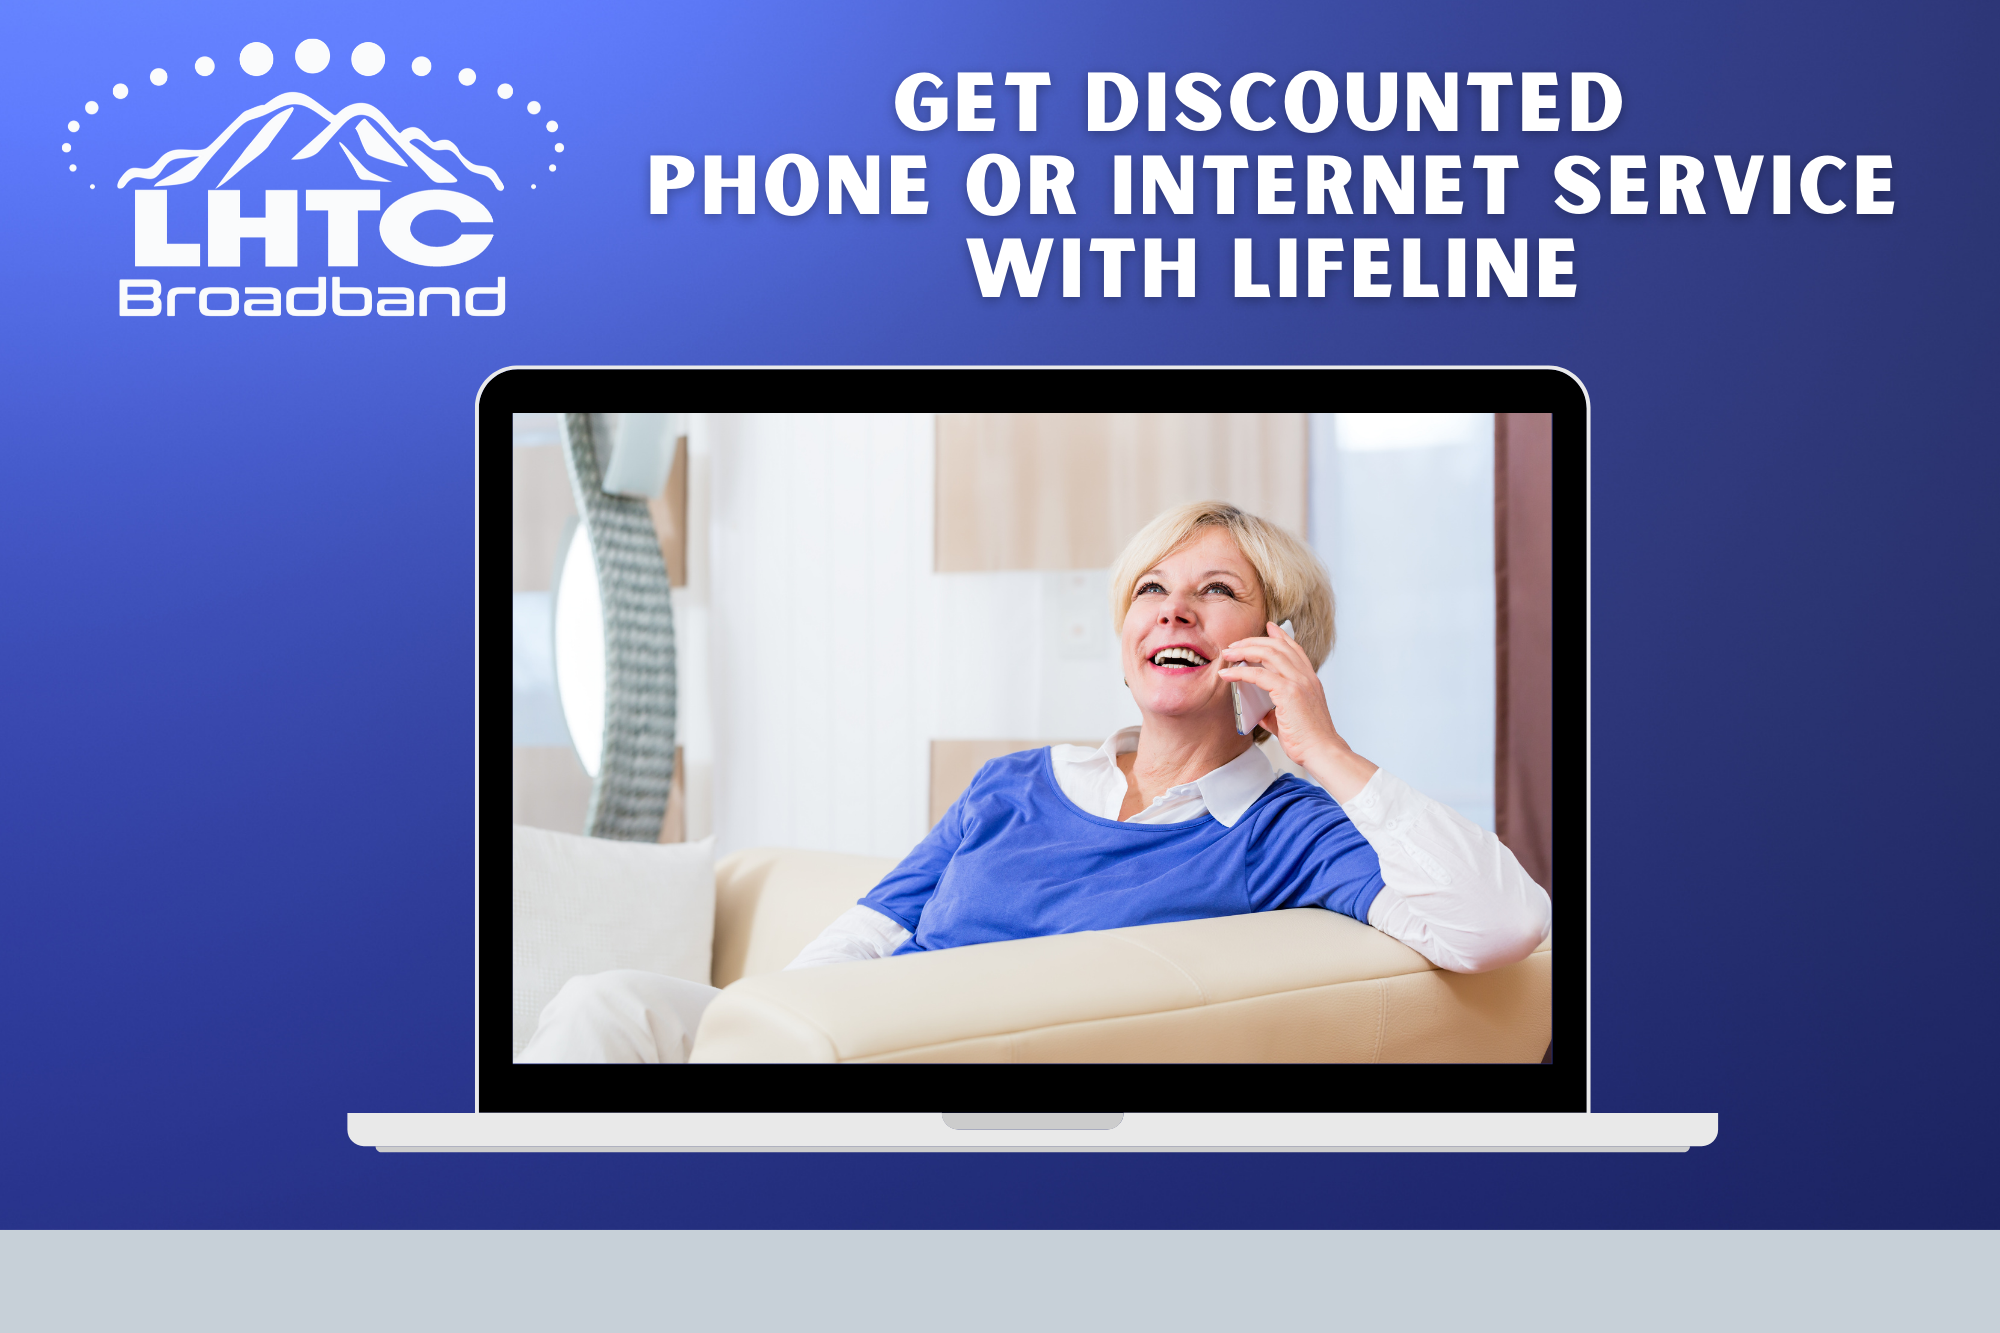 Get Discounted Phone or Internet Service with Lifeline